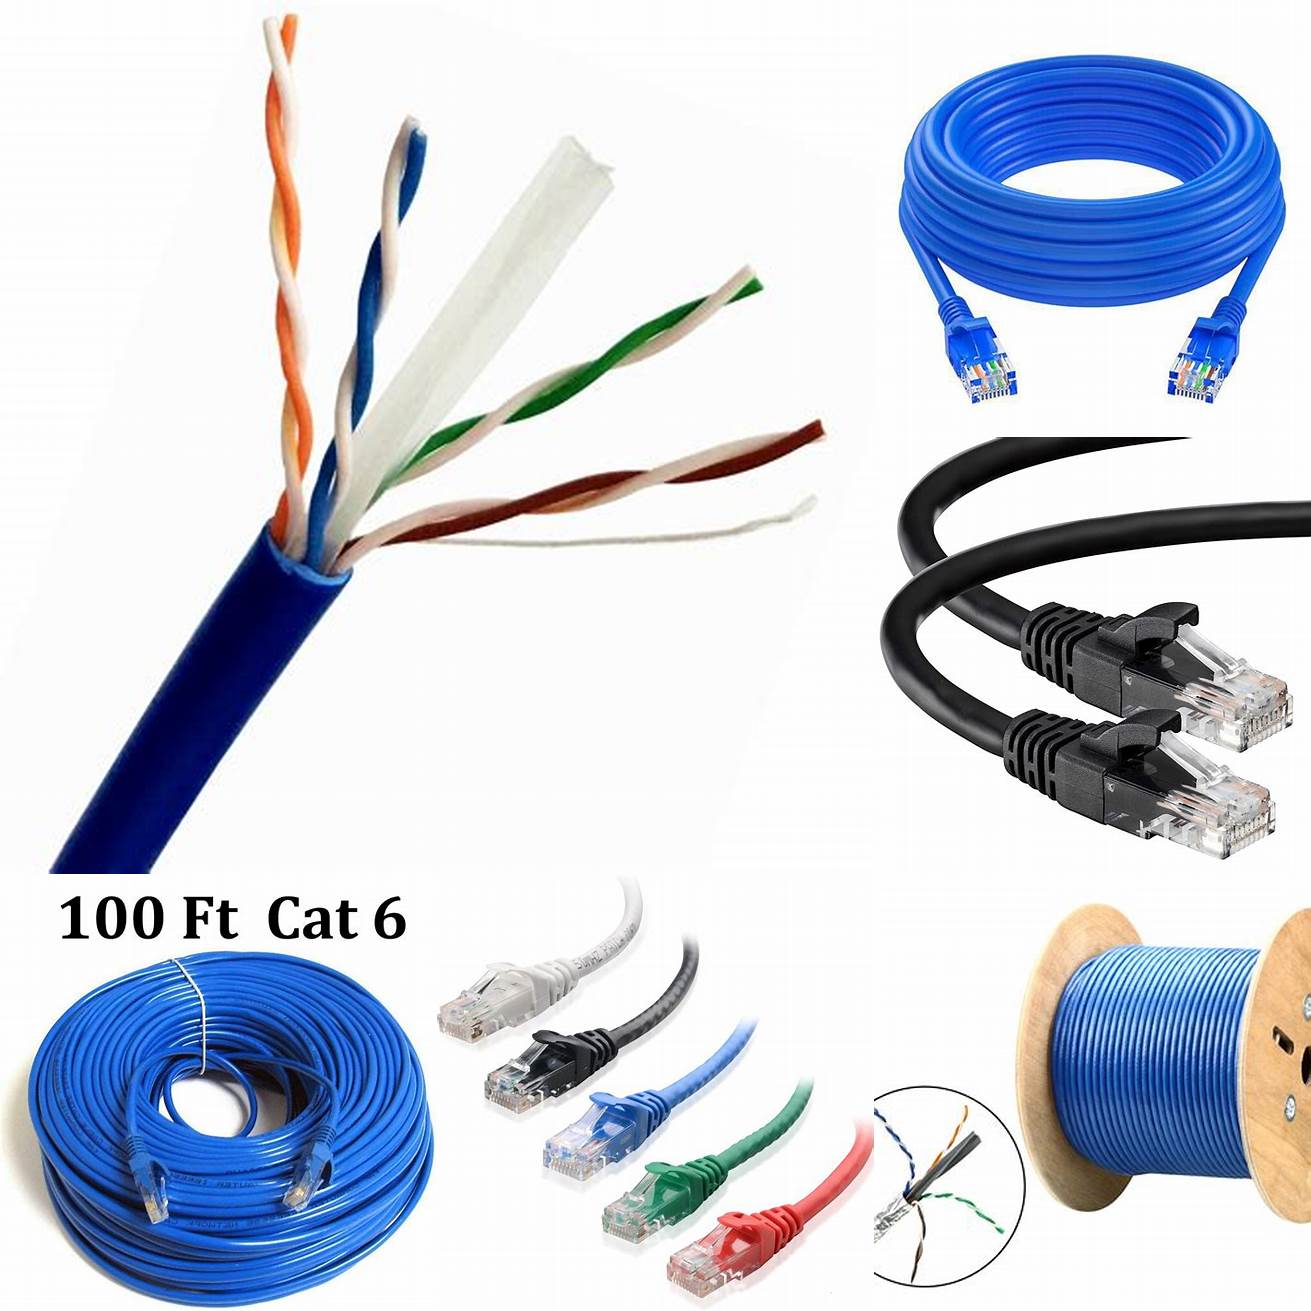 Image of Cat 6 cable